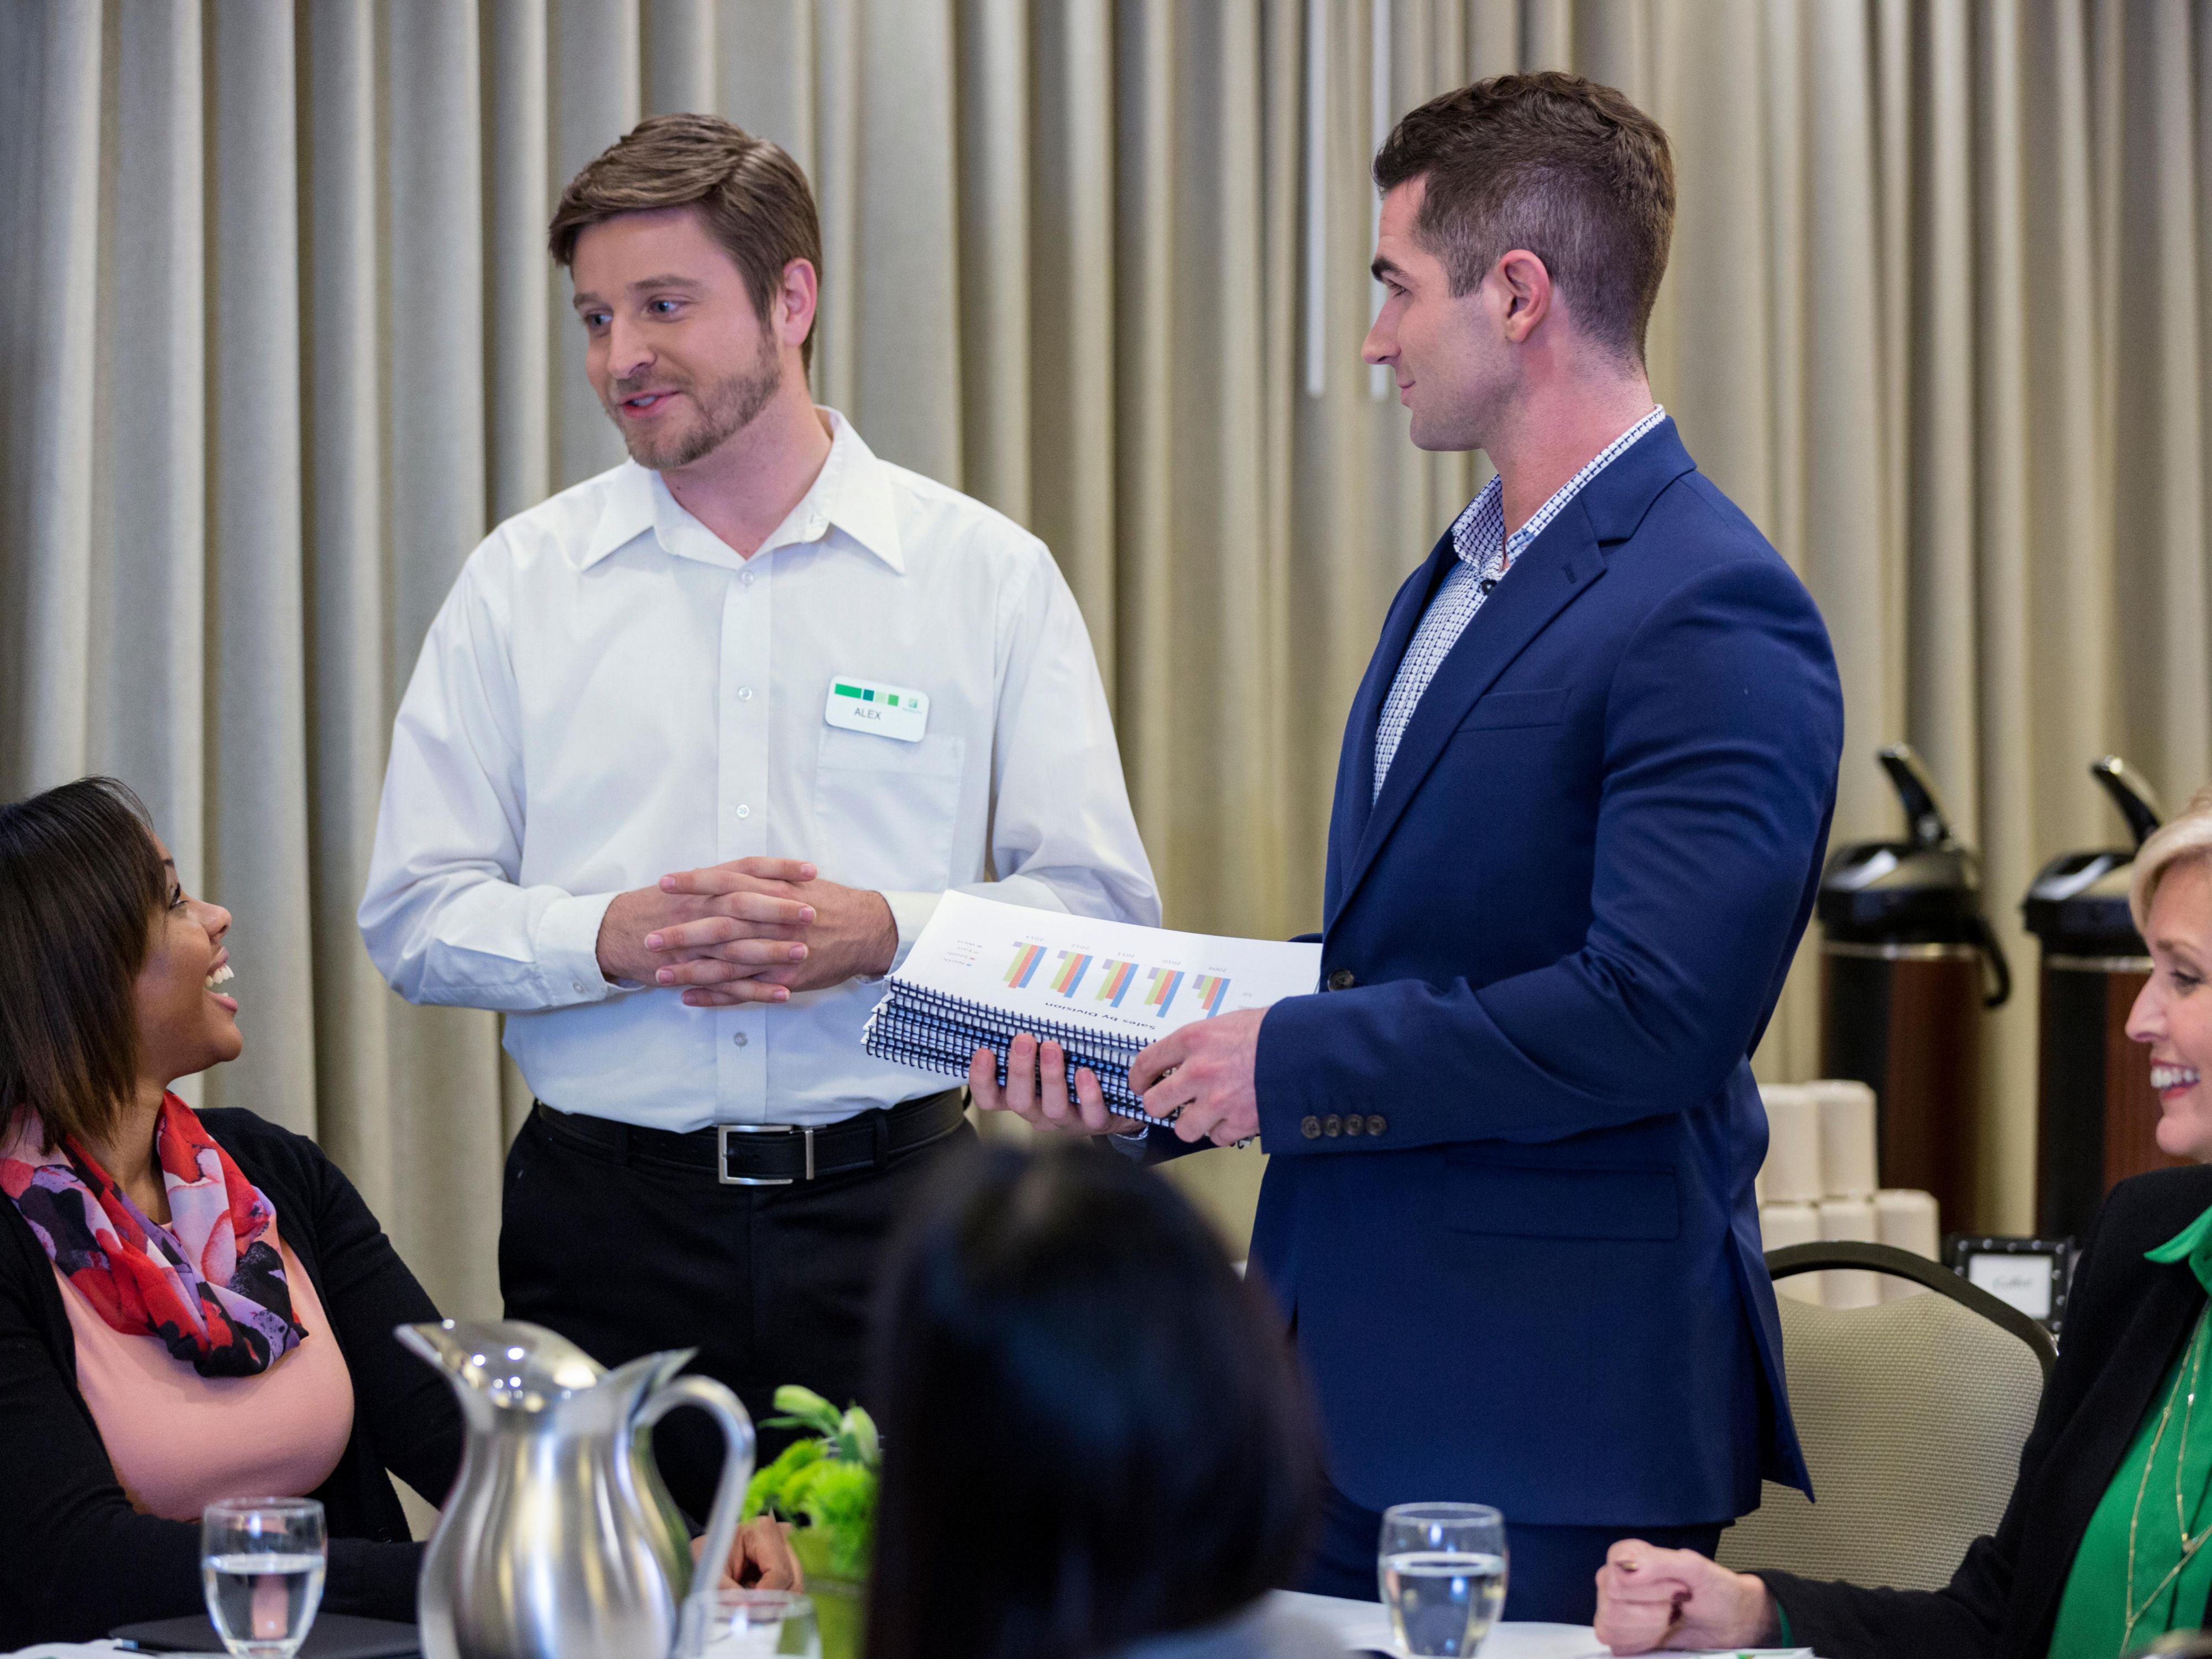 Meet with Confidence at The Holiday Inn Saskatoon Downtown, as we offer ample options to host your meetings, while keeping the Health and Safety of your delegates top of mind.  Contact us for more details at 306-986-5000.